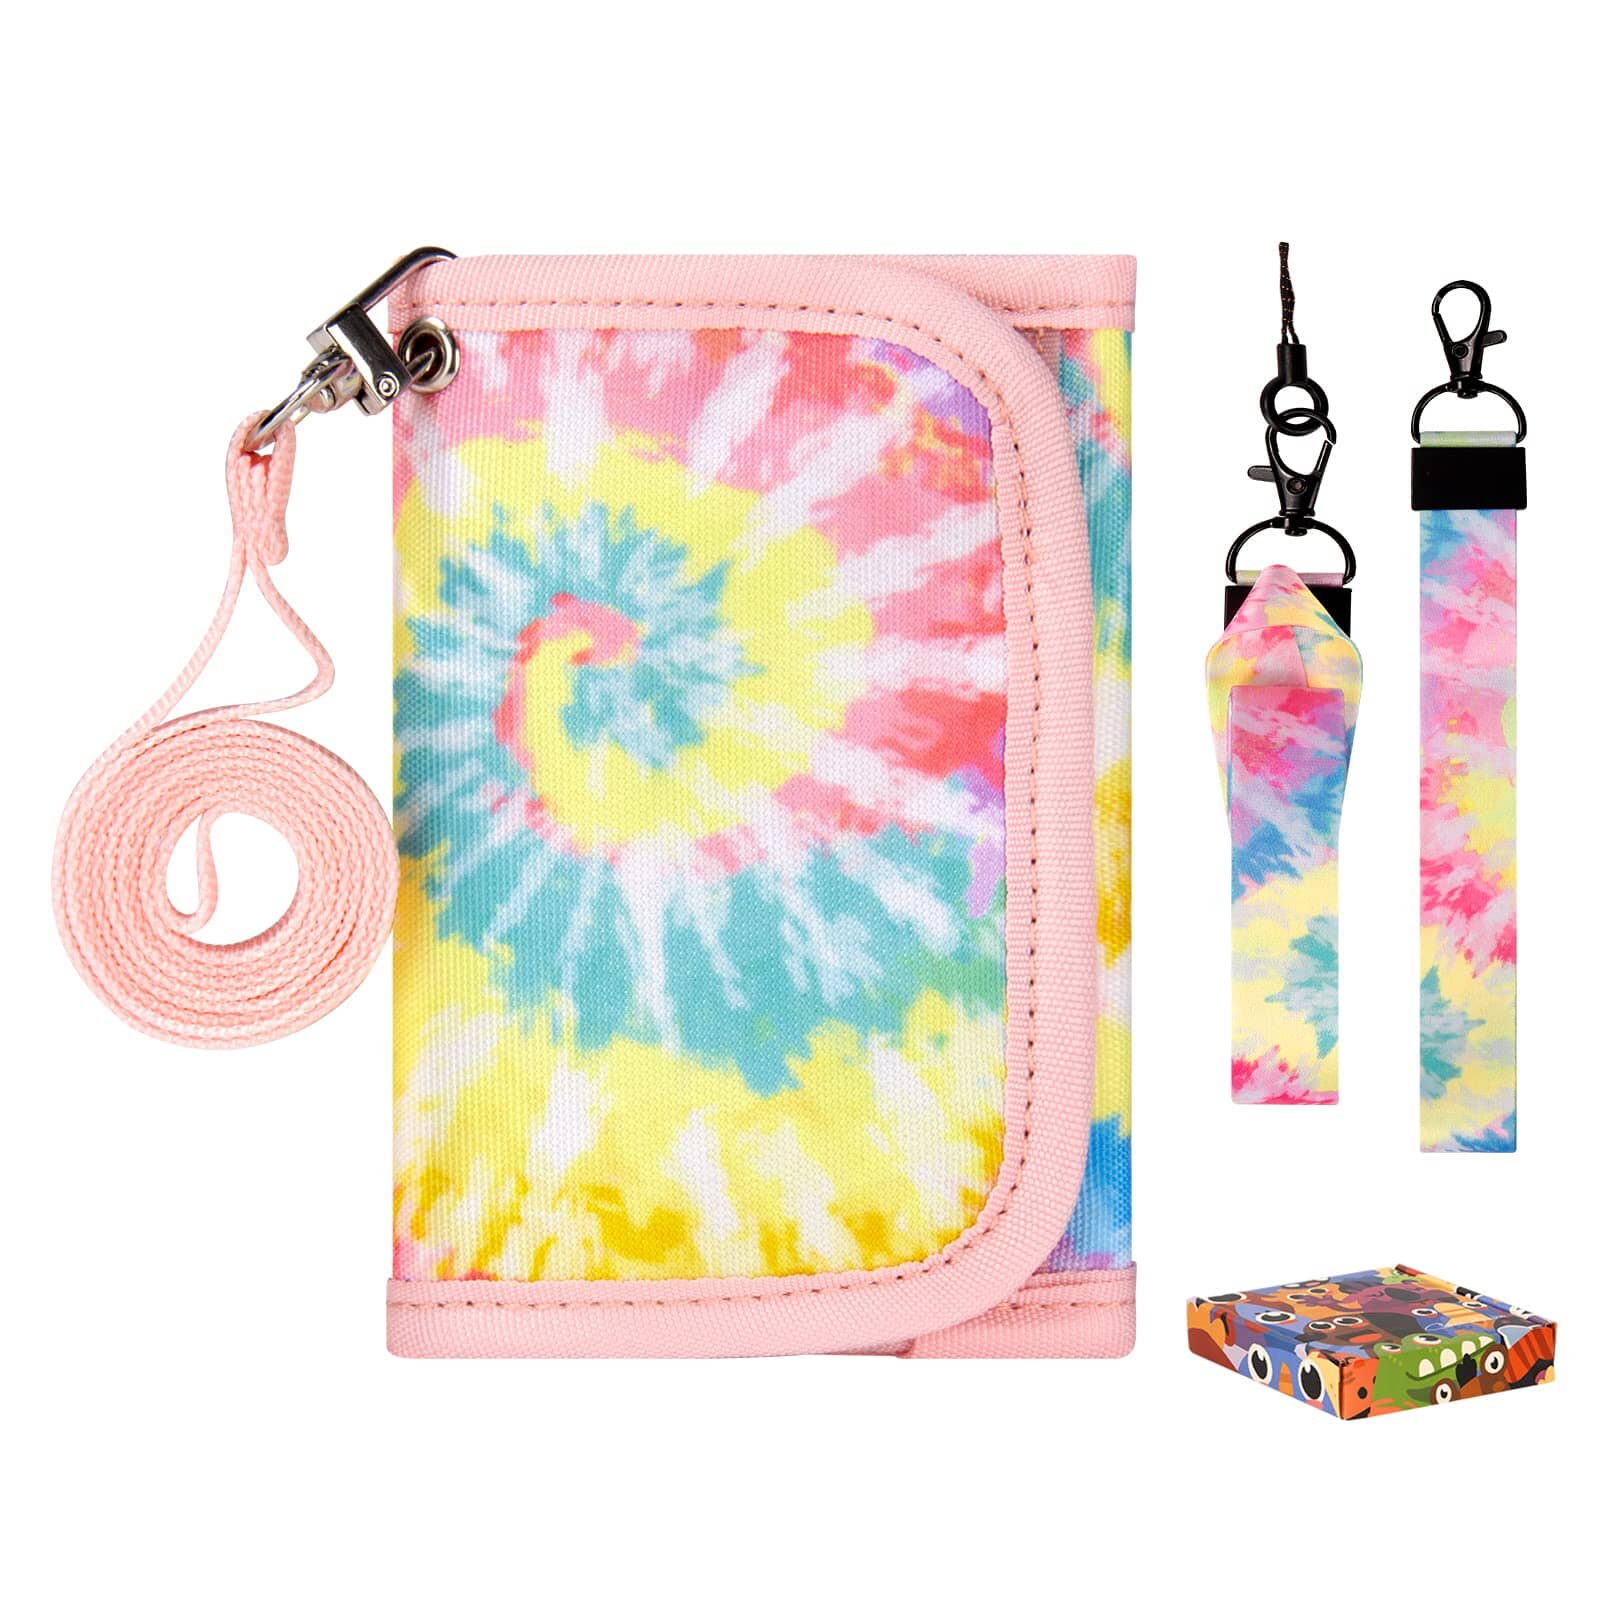 Choco Mocha Tie Dye Kids Wallets for Girls Ages 5-7 6-8 9-12, Little Girls Velcro Wallets with Lanyard Gift Box, Christmas Gift for Kids Girls, Multicolor Swirl chocomochakids 